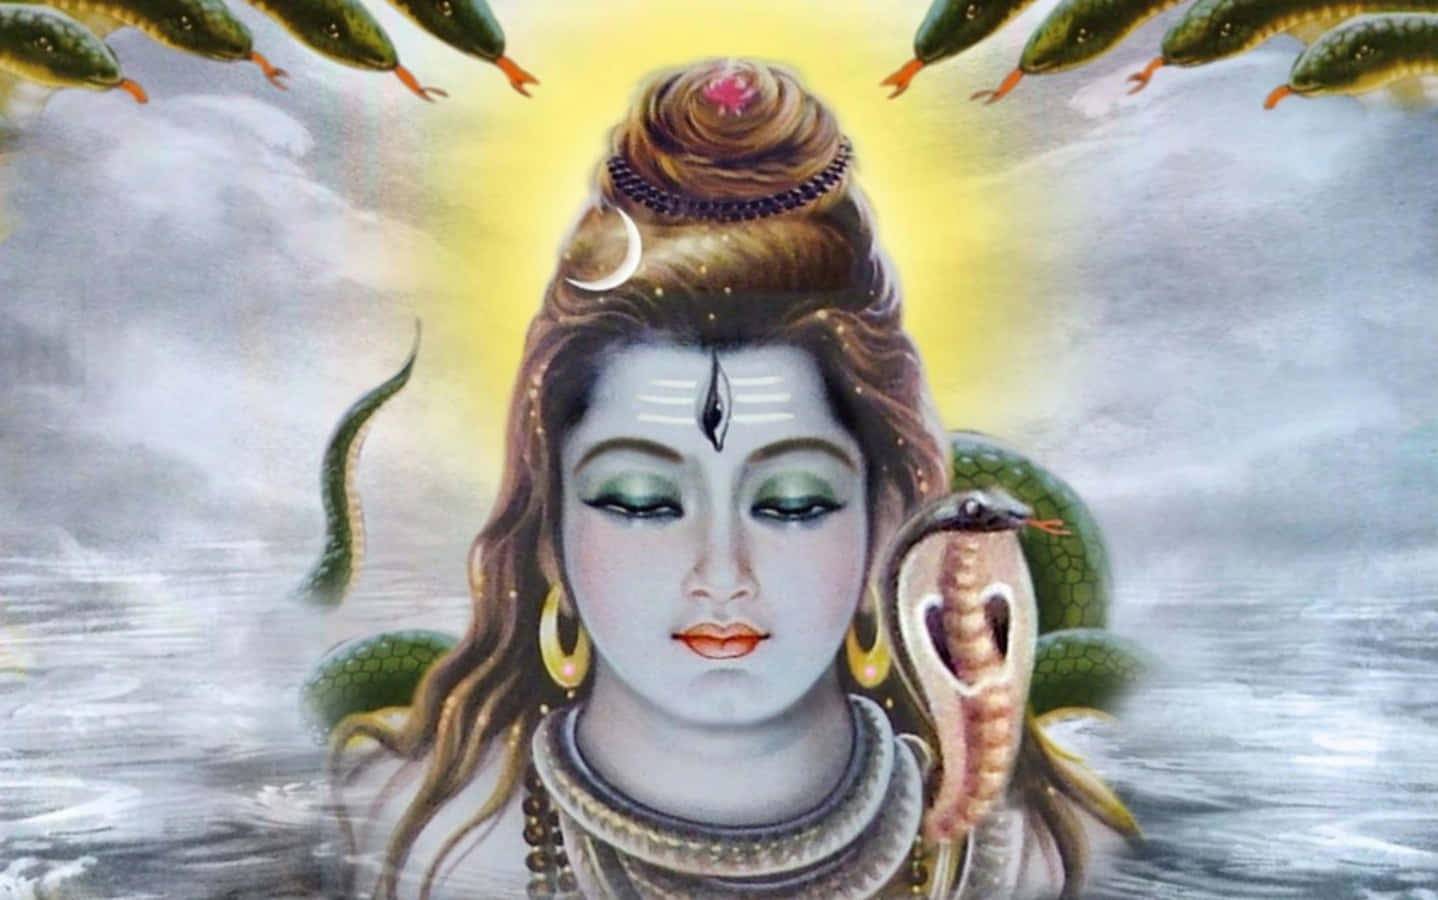 Lord Shiva - The Supreme Being